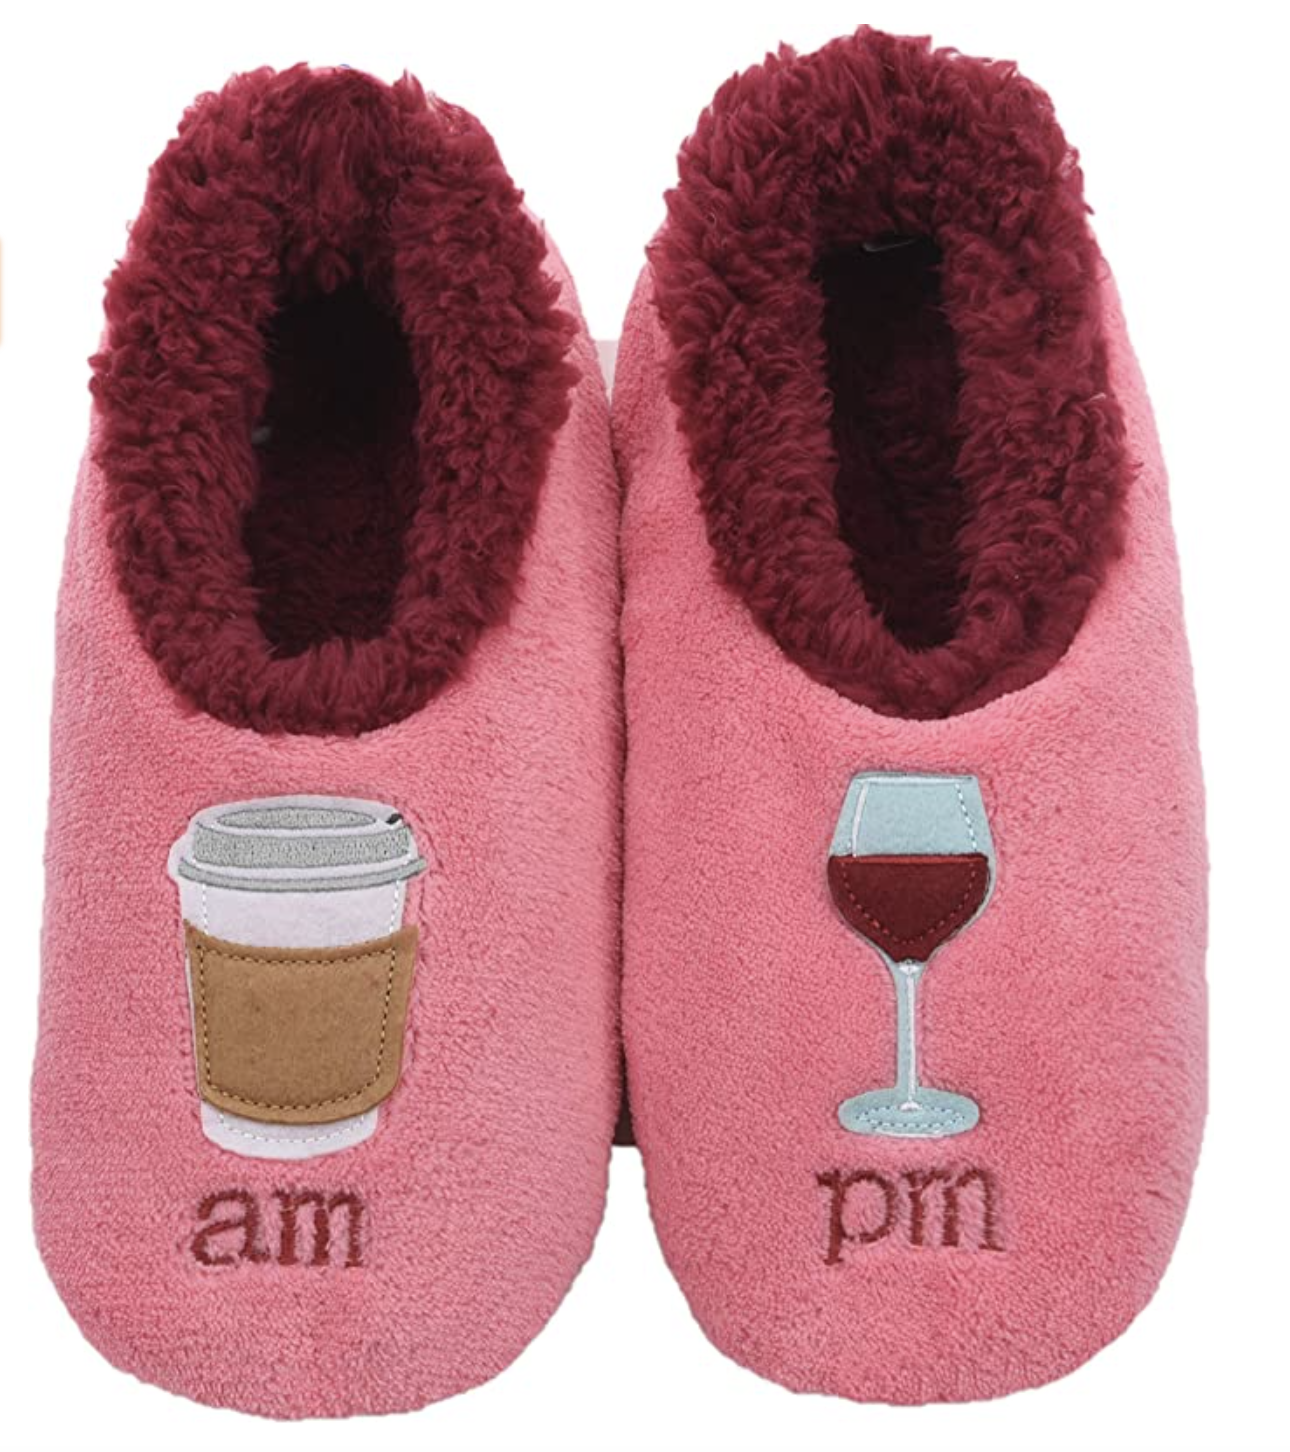 Home office essentials - wine slippers